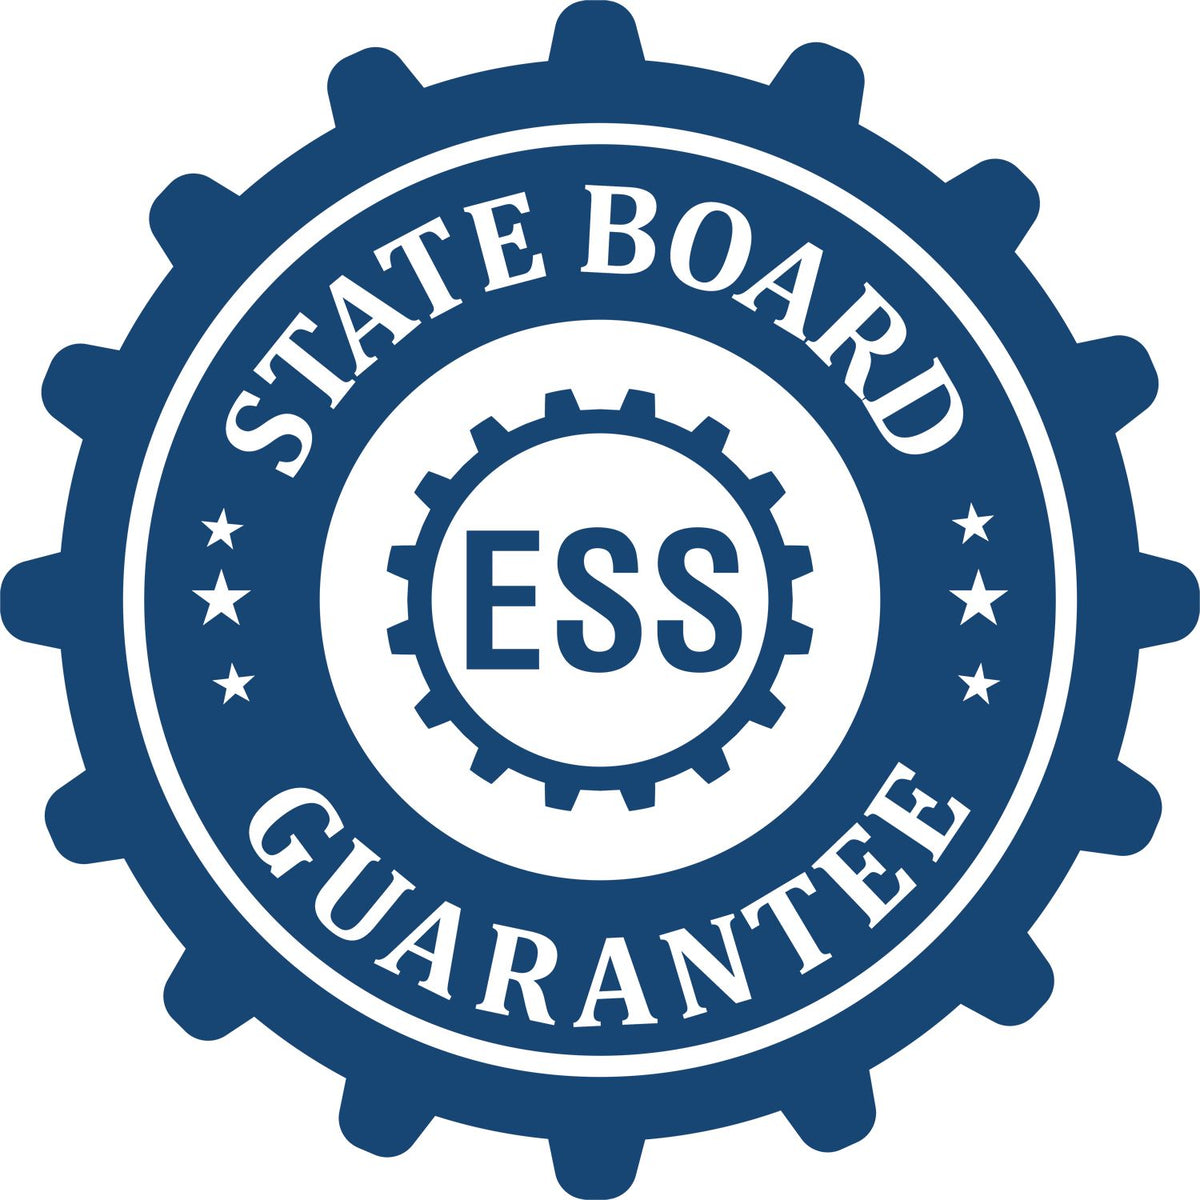 An emblem in a gear shape illustrating a state board guarantee for the Premium MaxLight Pre-Inked Hawaii Landscape Architectural Stamp product.